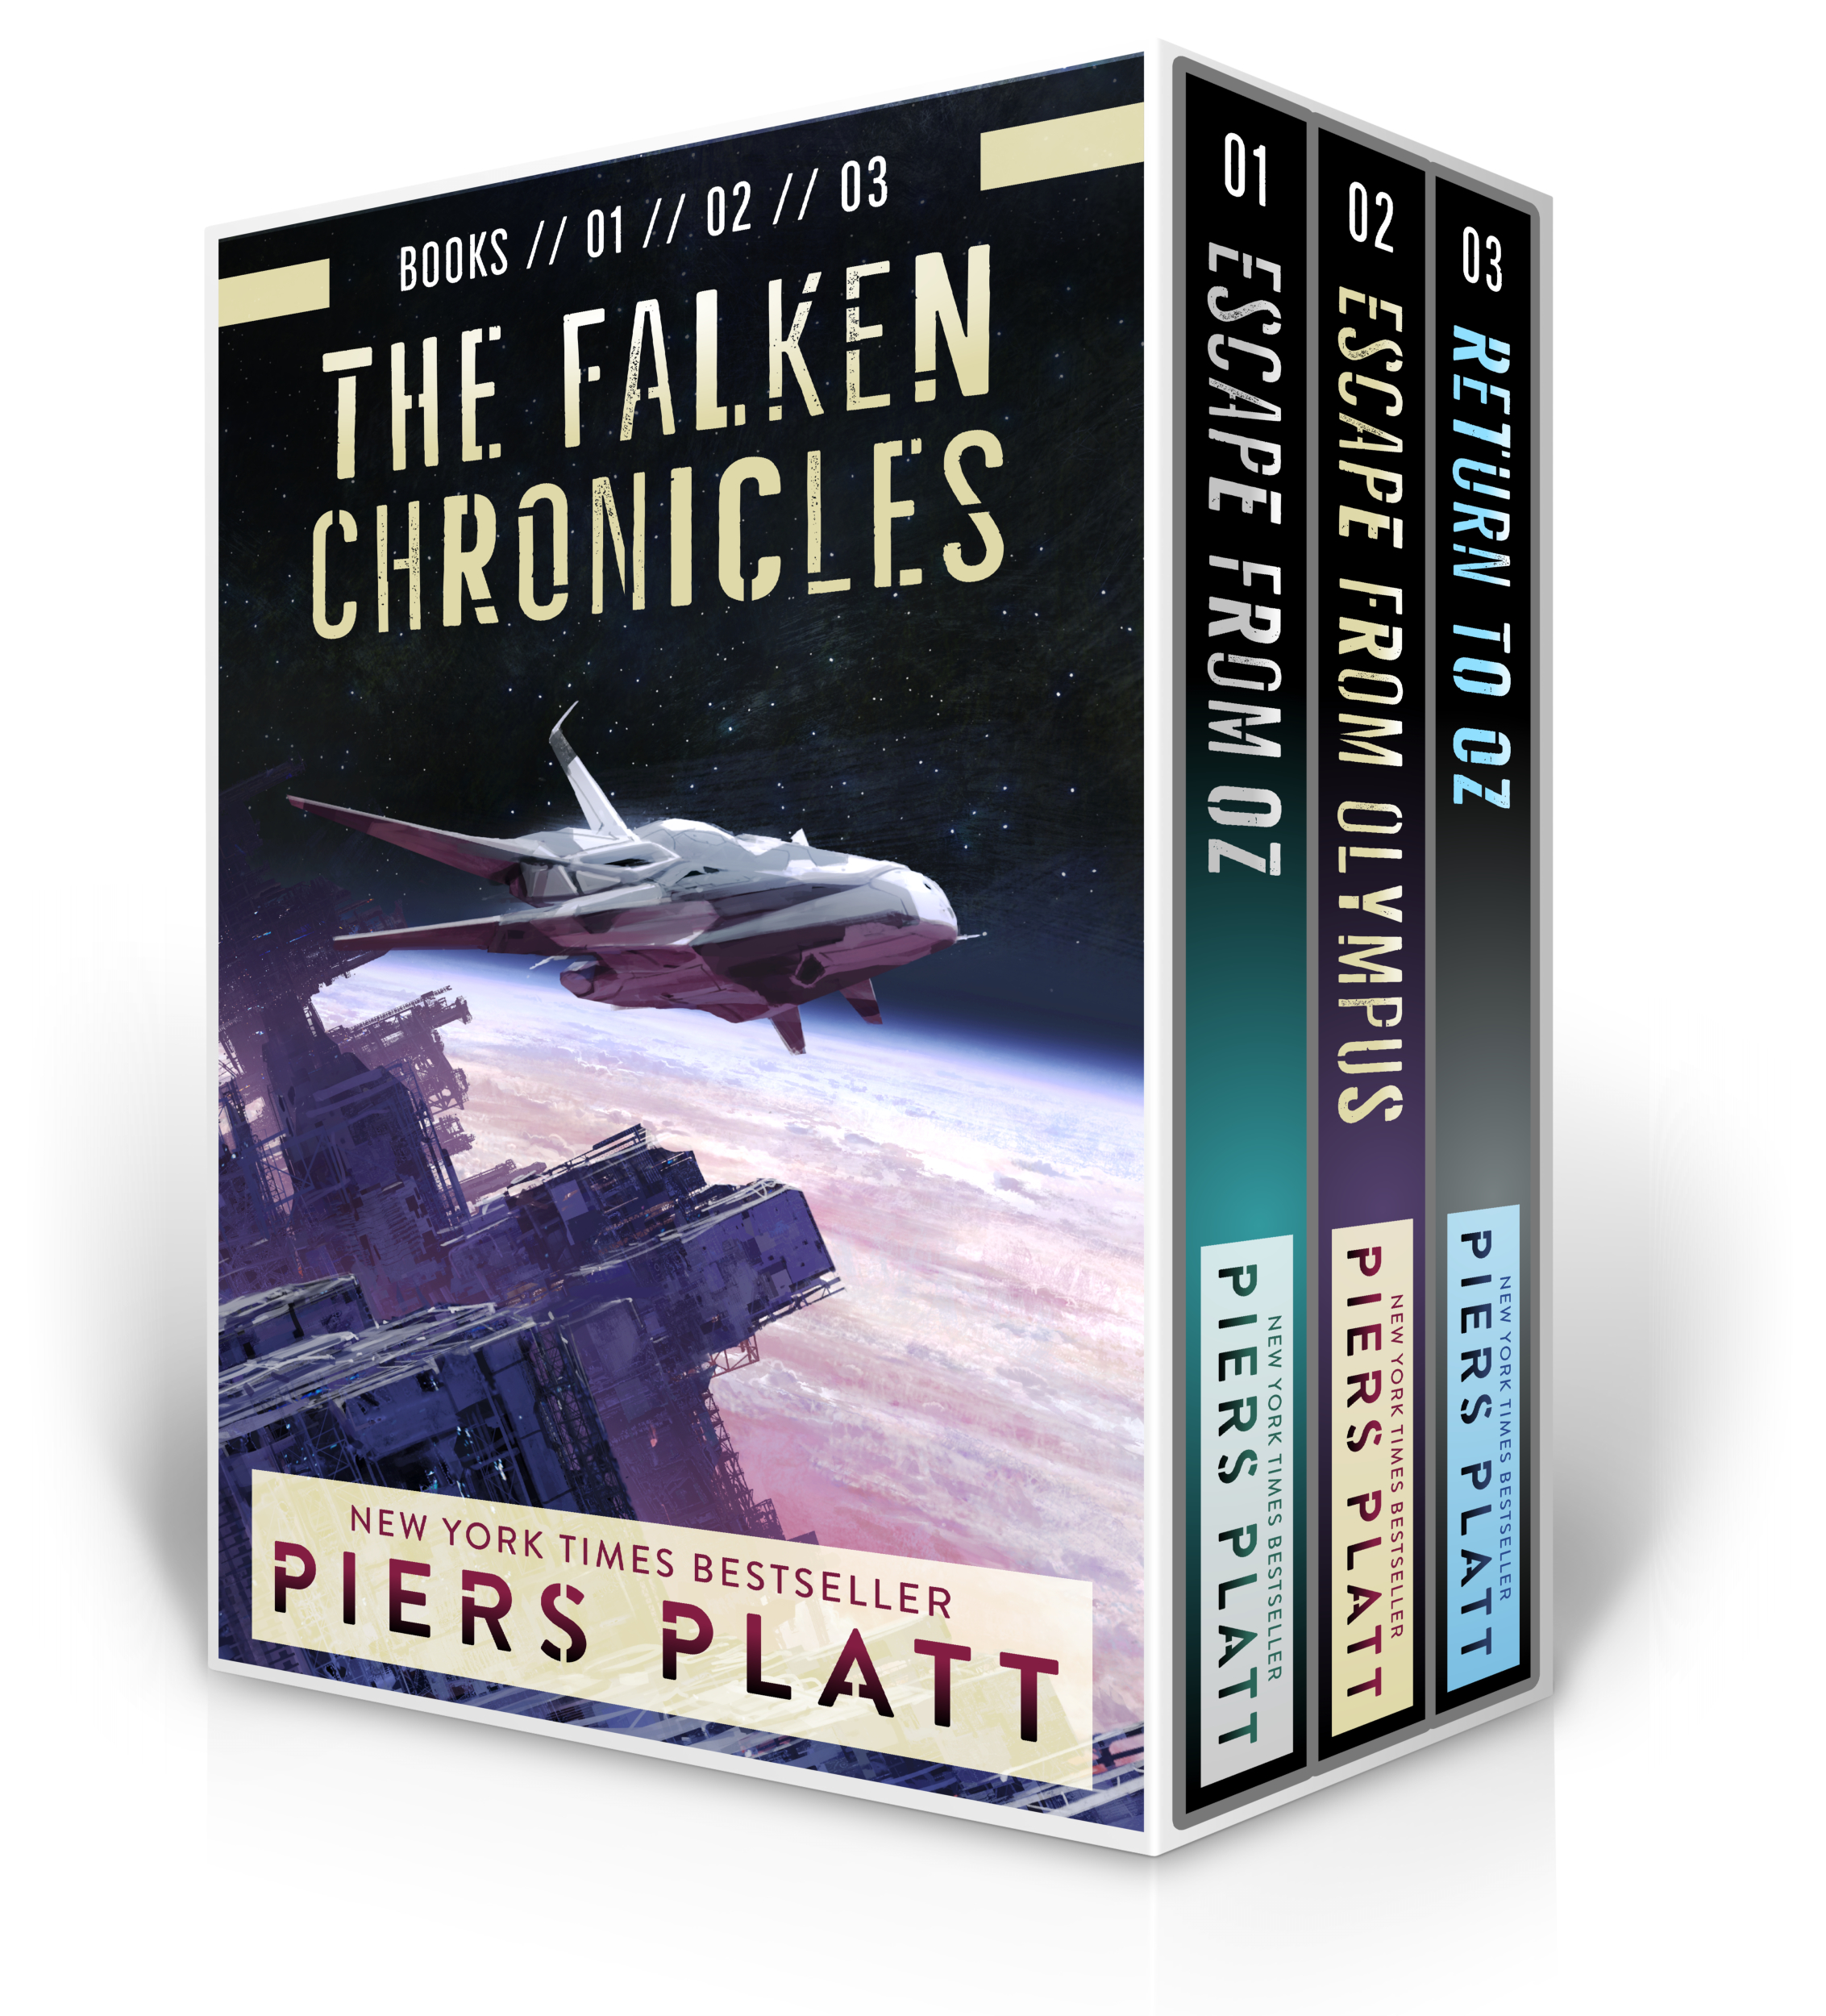 The Falken Chronicles: The Complete Trilogy